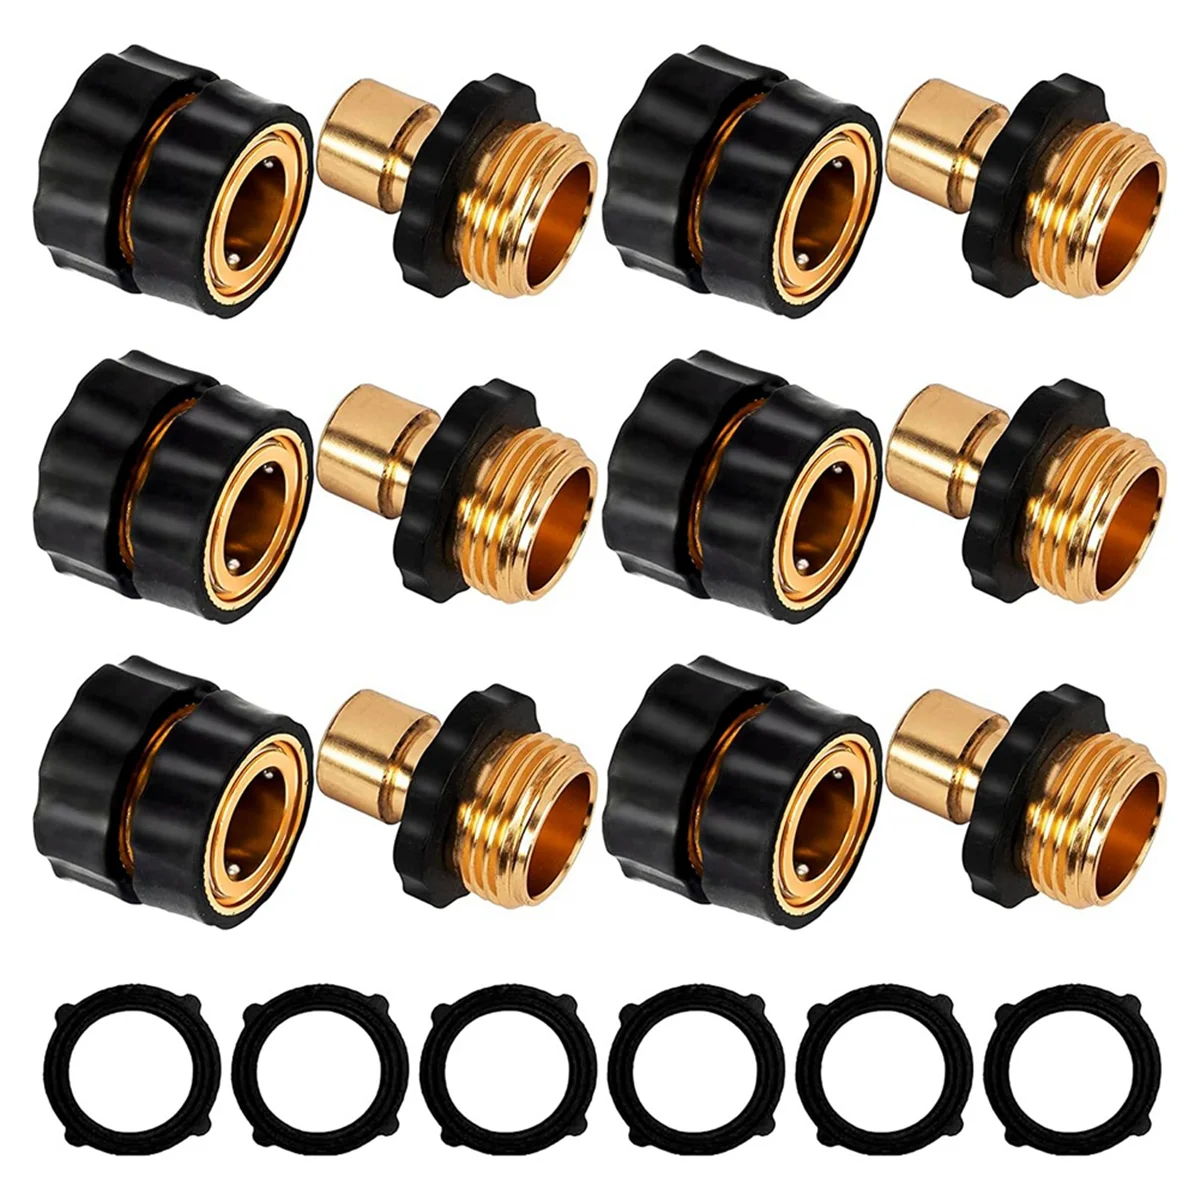 

3/4 Inch Garden Hose Quick Connect,Garden Hose Fittings,Male and Female Water Quick Release Hose Connector,6 Set